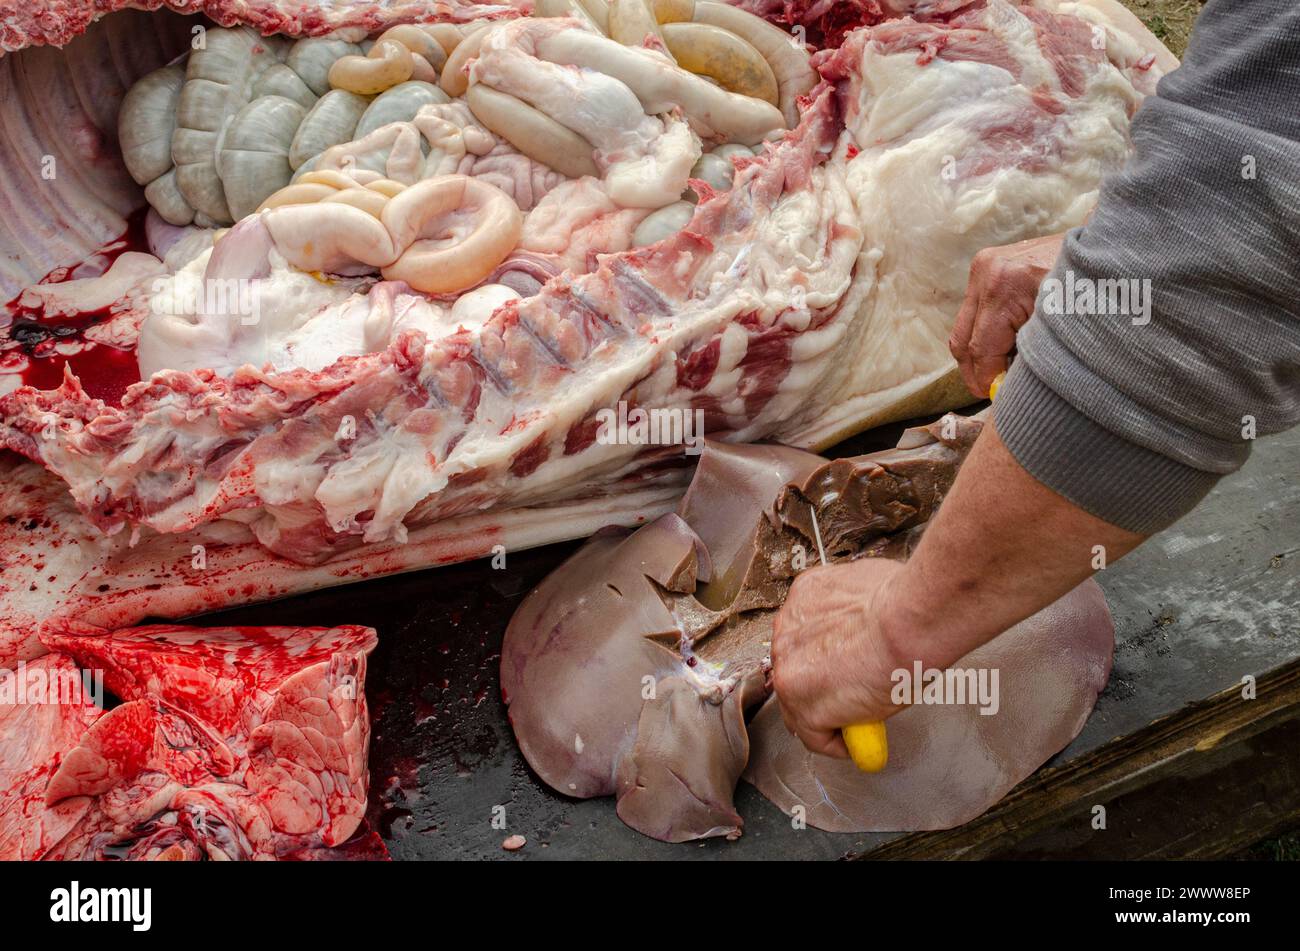 a butcher cleans the pig's liver, butchers a pork according to traditional Eastern European methods Stock Photo